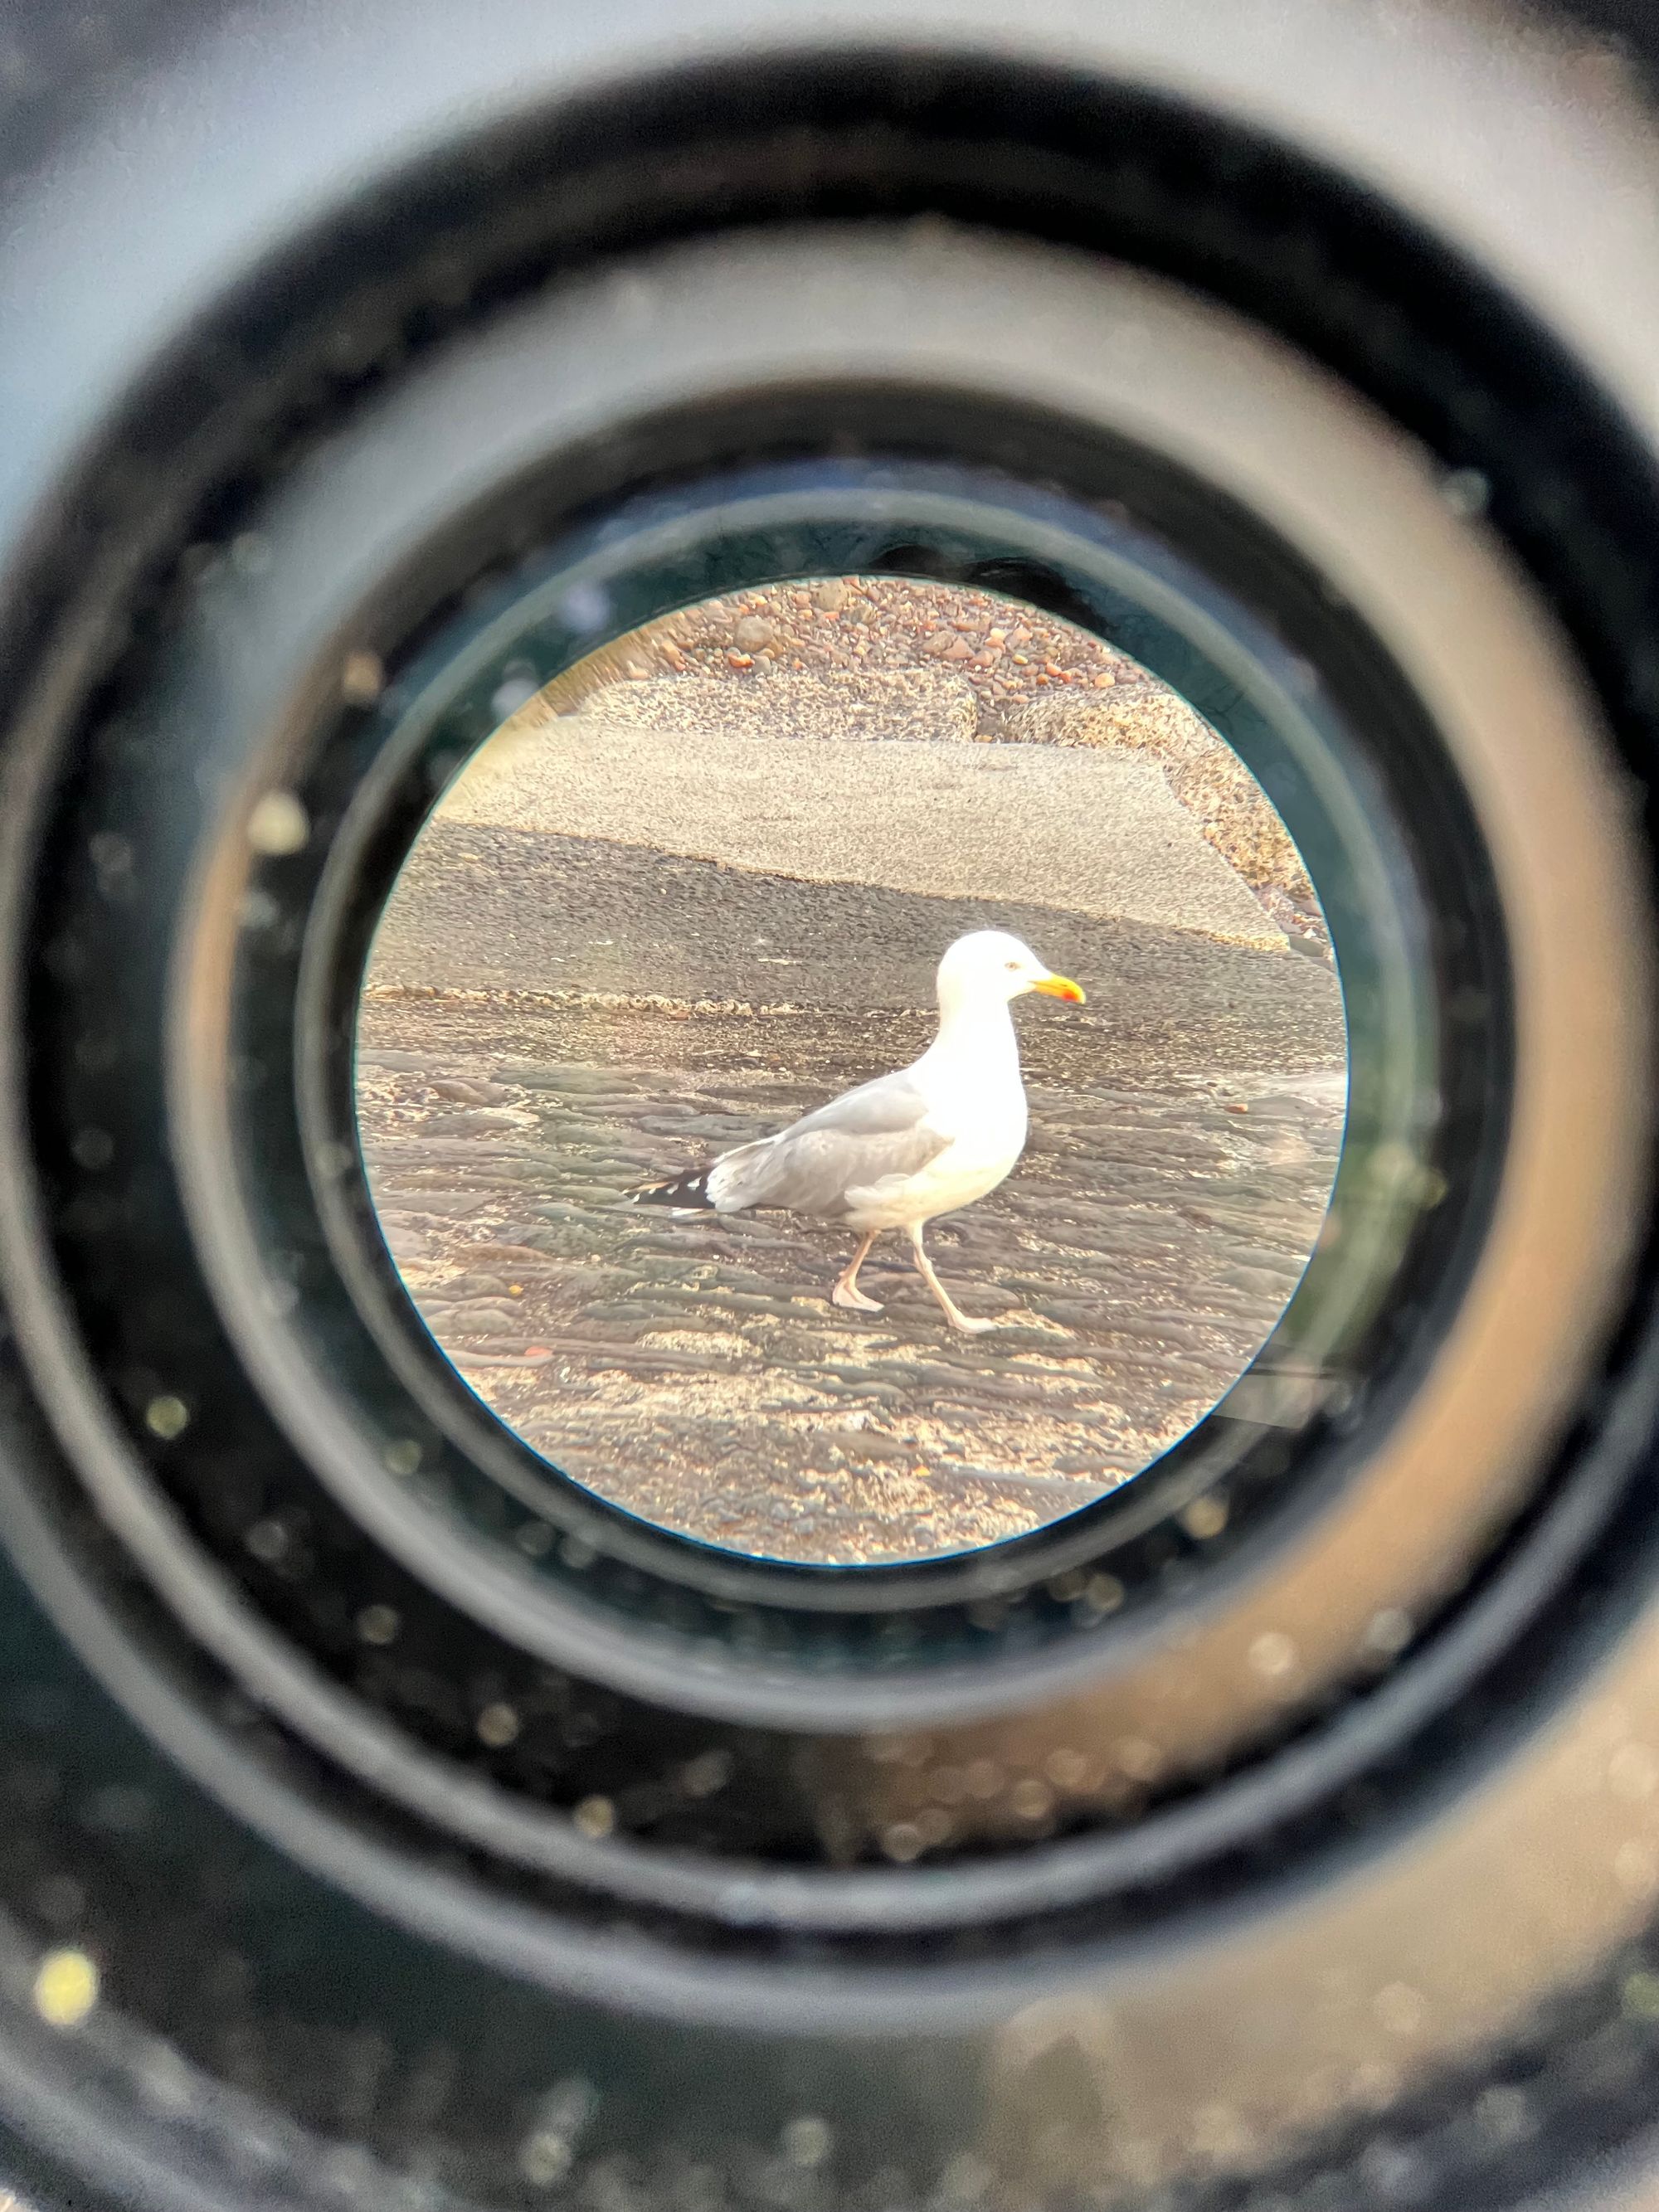 Framed by a binocular ring, a herring gull in profile steps jauntily to the right over sand-strewn stone.